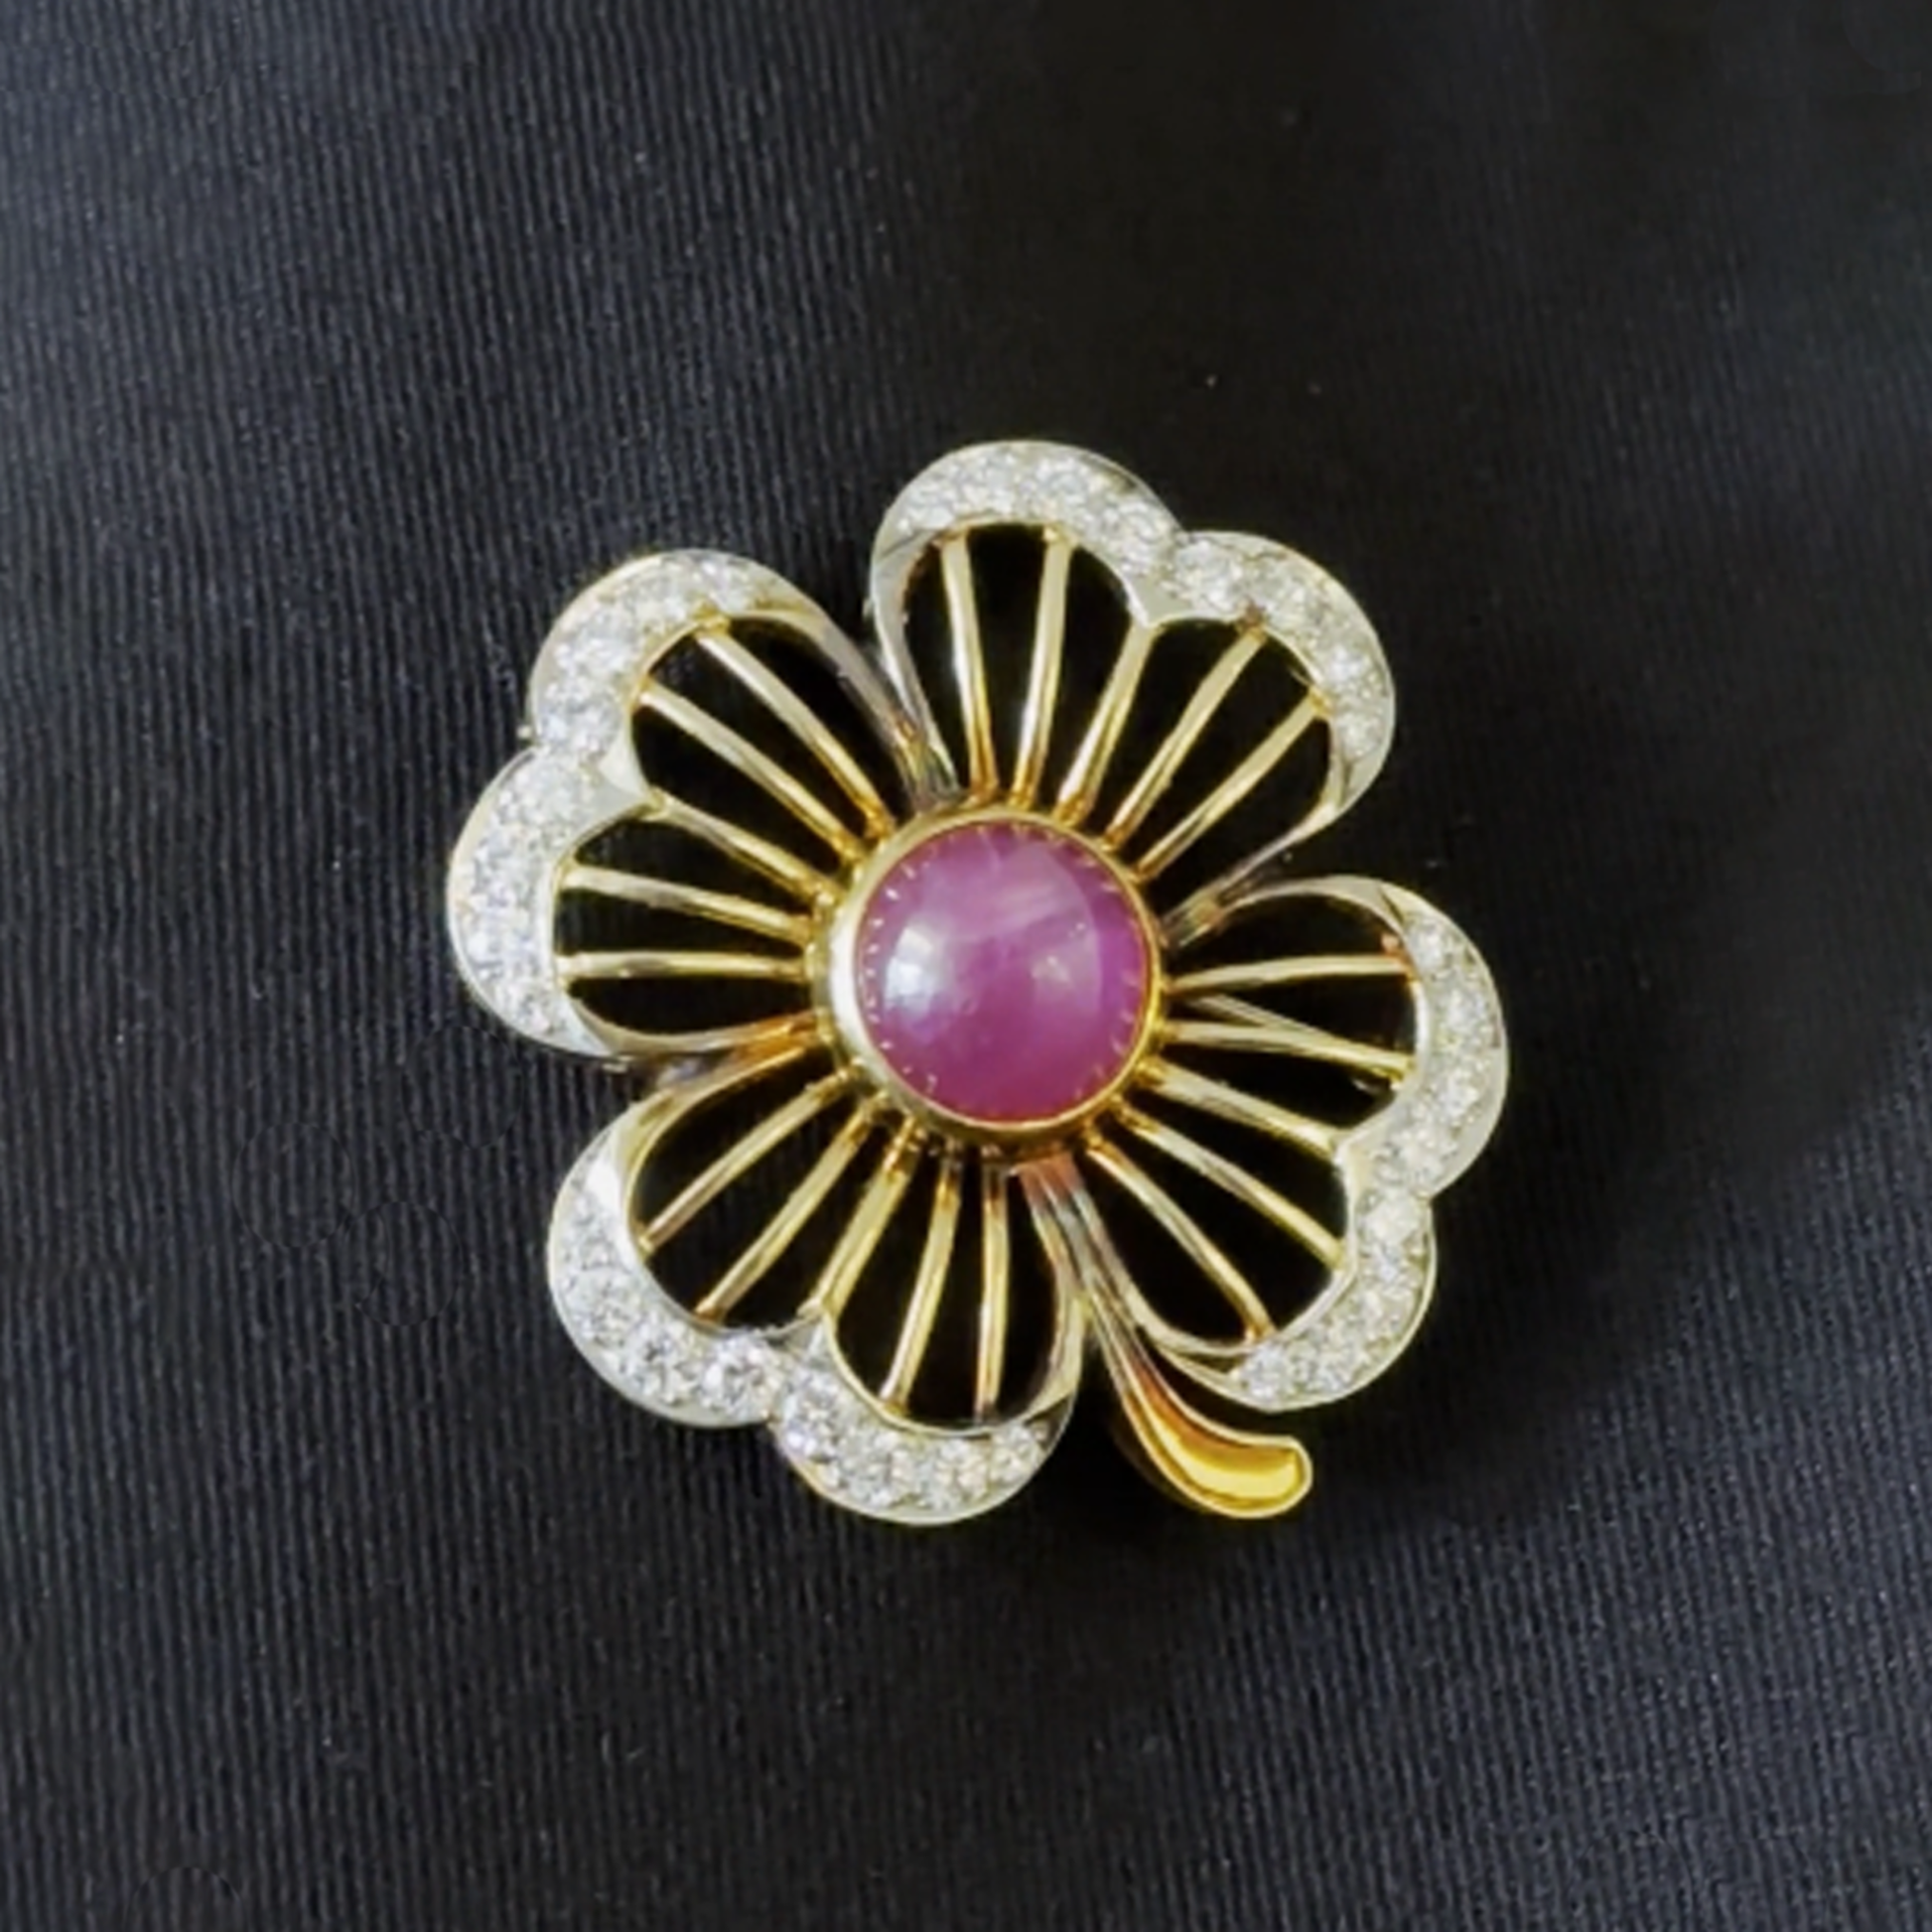 1970s 18KT Yellow Gold Ruby & Diamond Four-Leaf Clover Brooch front